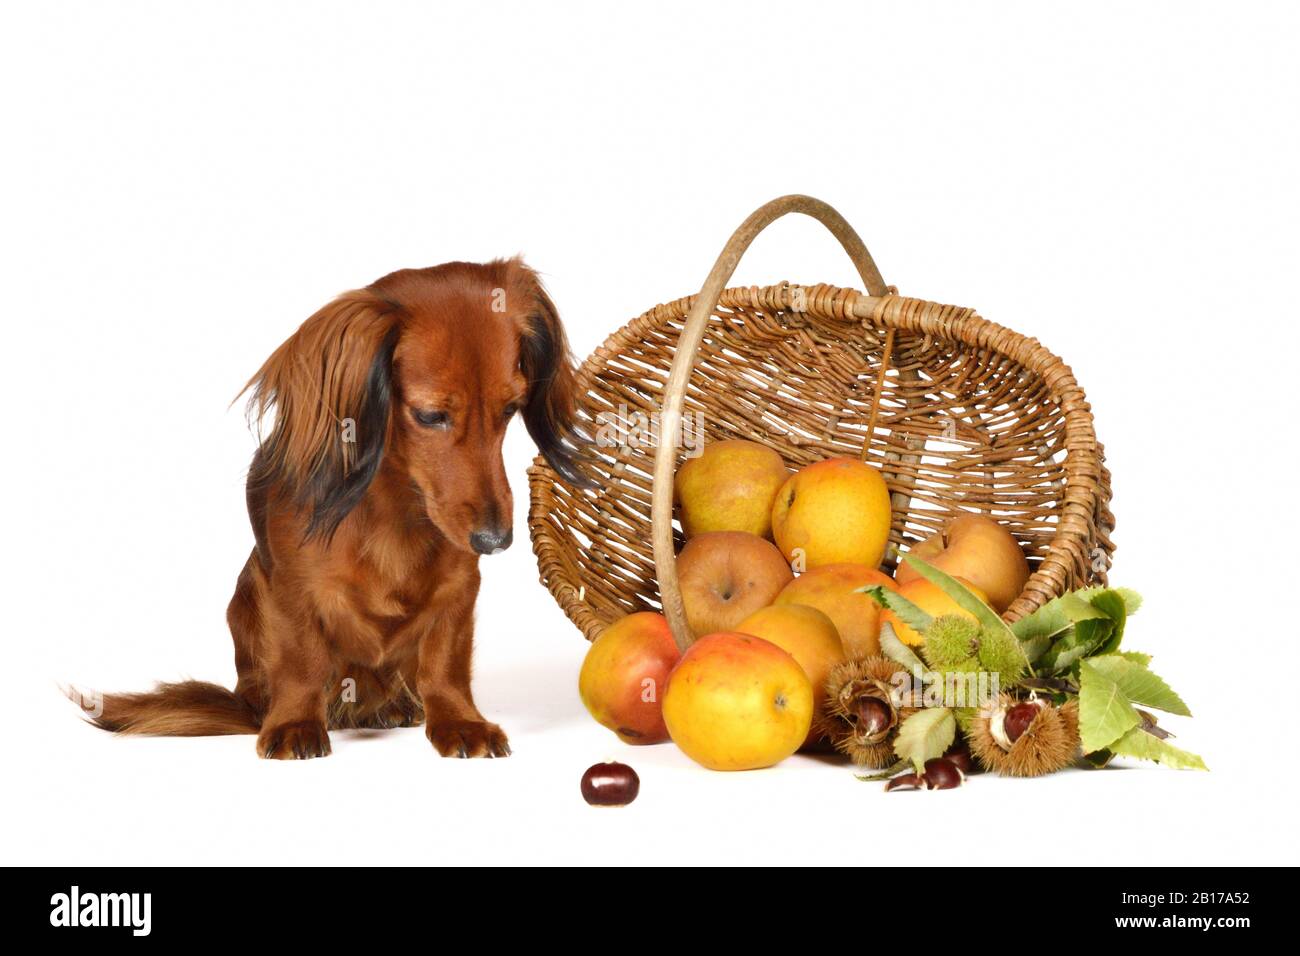 Long-haired Dachshund, Long-haired sausage dog, domestic dog (Canis lupus f. familiaris), female dog looking curiously to a marone in front of an apple basket Stock Photo